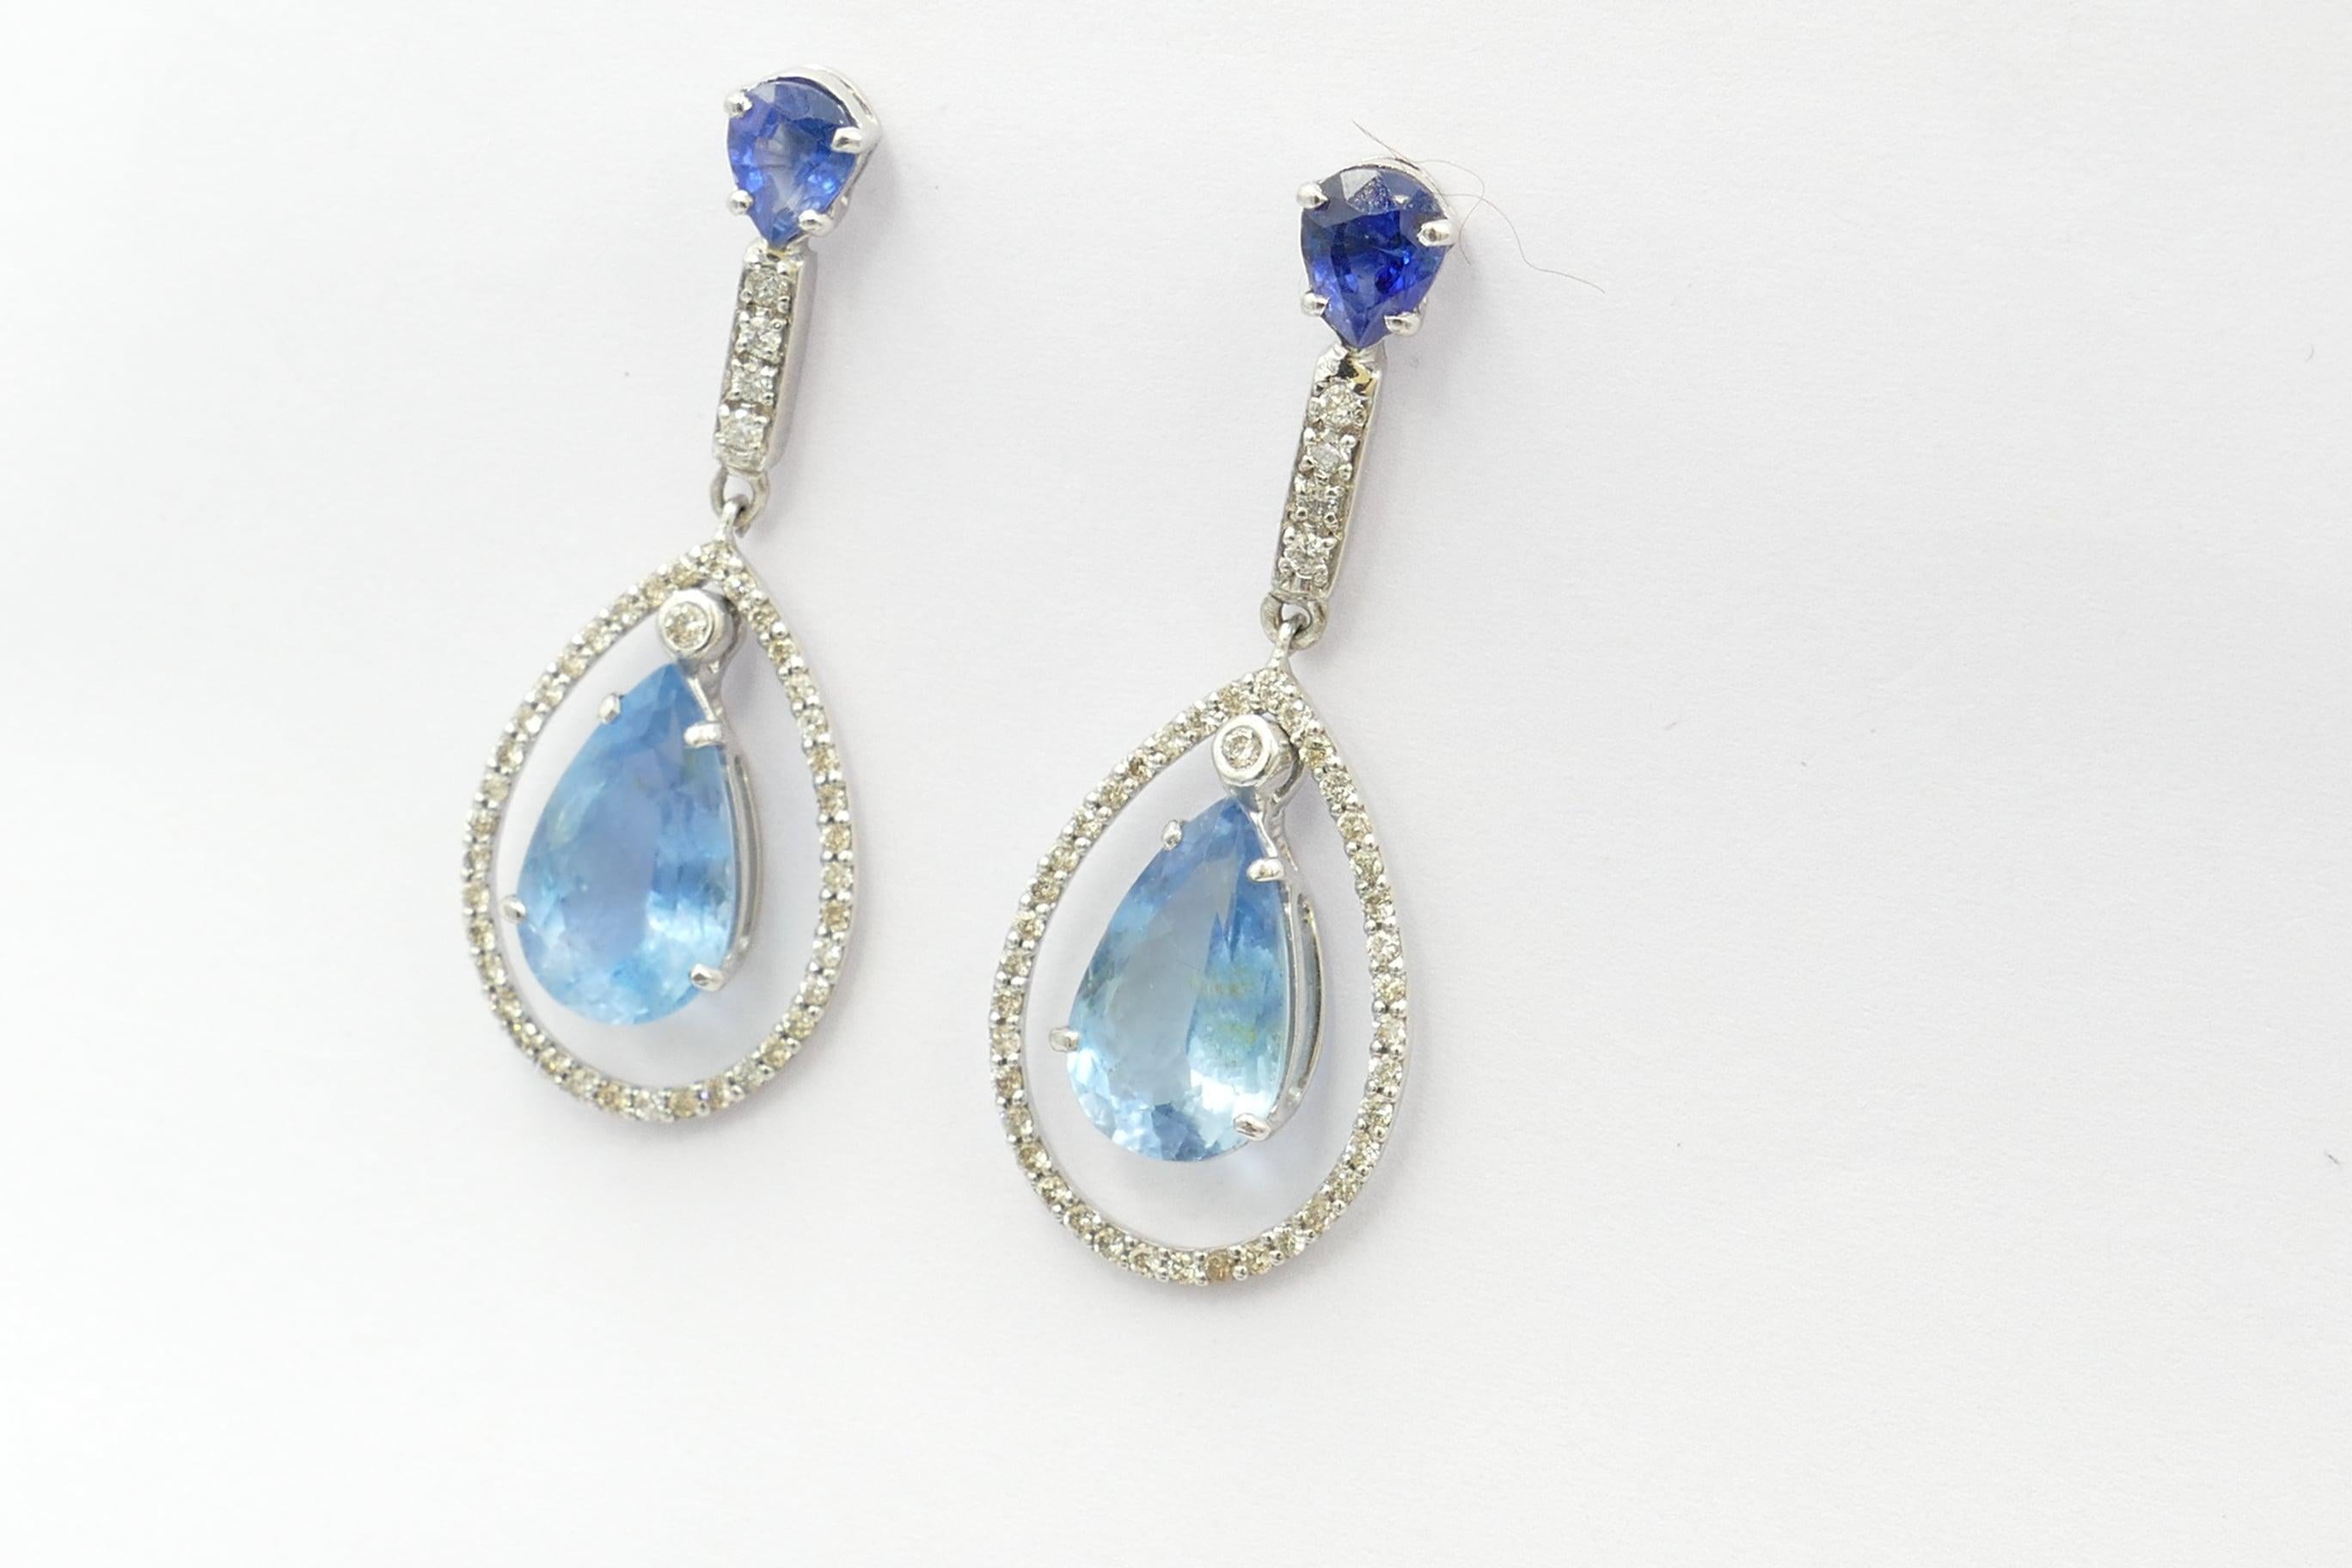 What a fabulously unusual combination of stones that really work!
2 High Quality, Pear Cut Aquamarines, mid blue in Colour, Tone medium, Clarity eye-clean, individually claw set are the dominant feature of these absolutely stunning Earrings. 
As